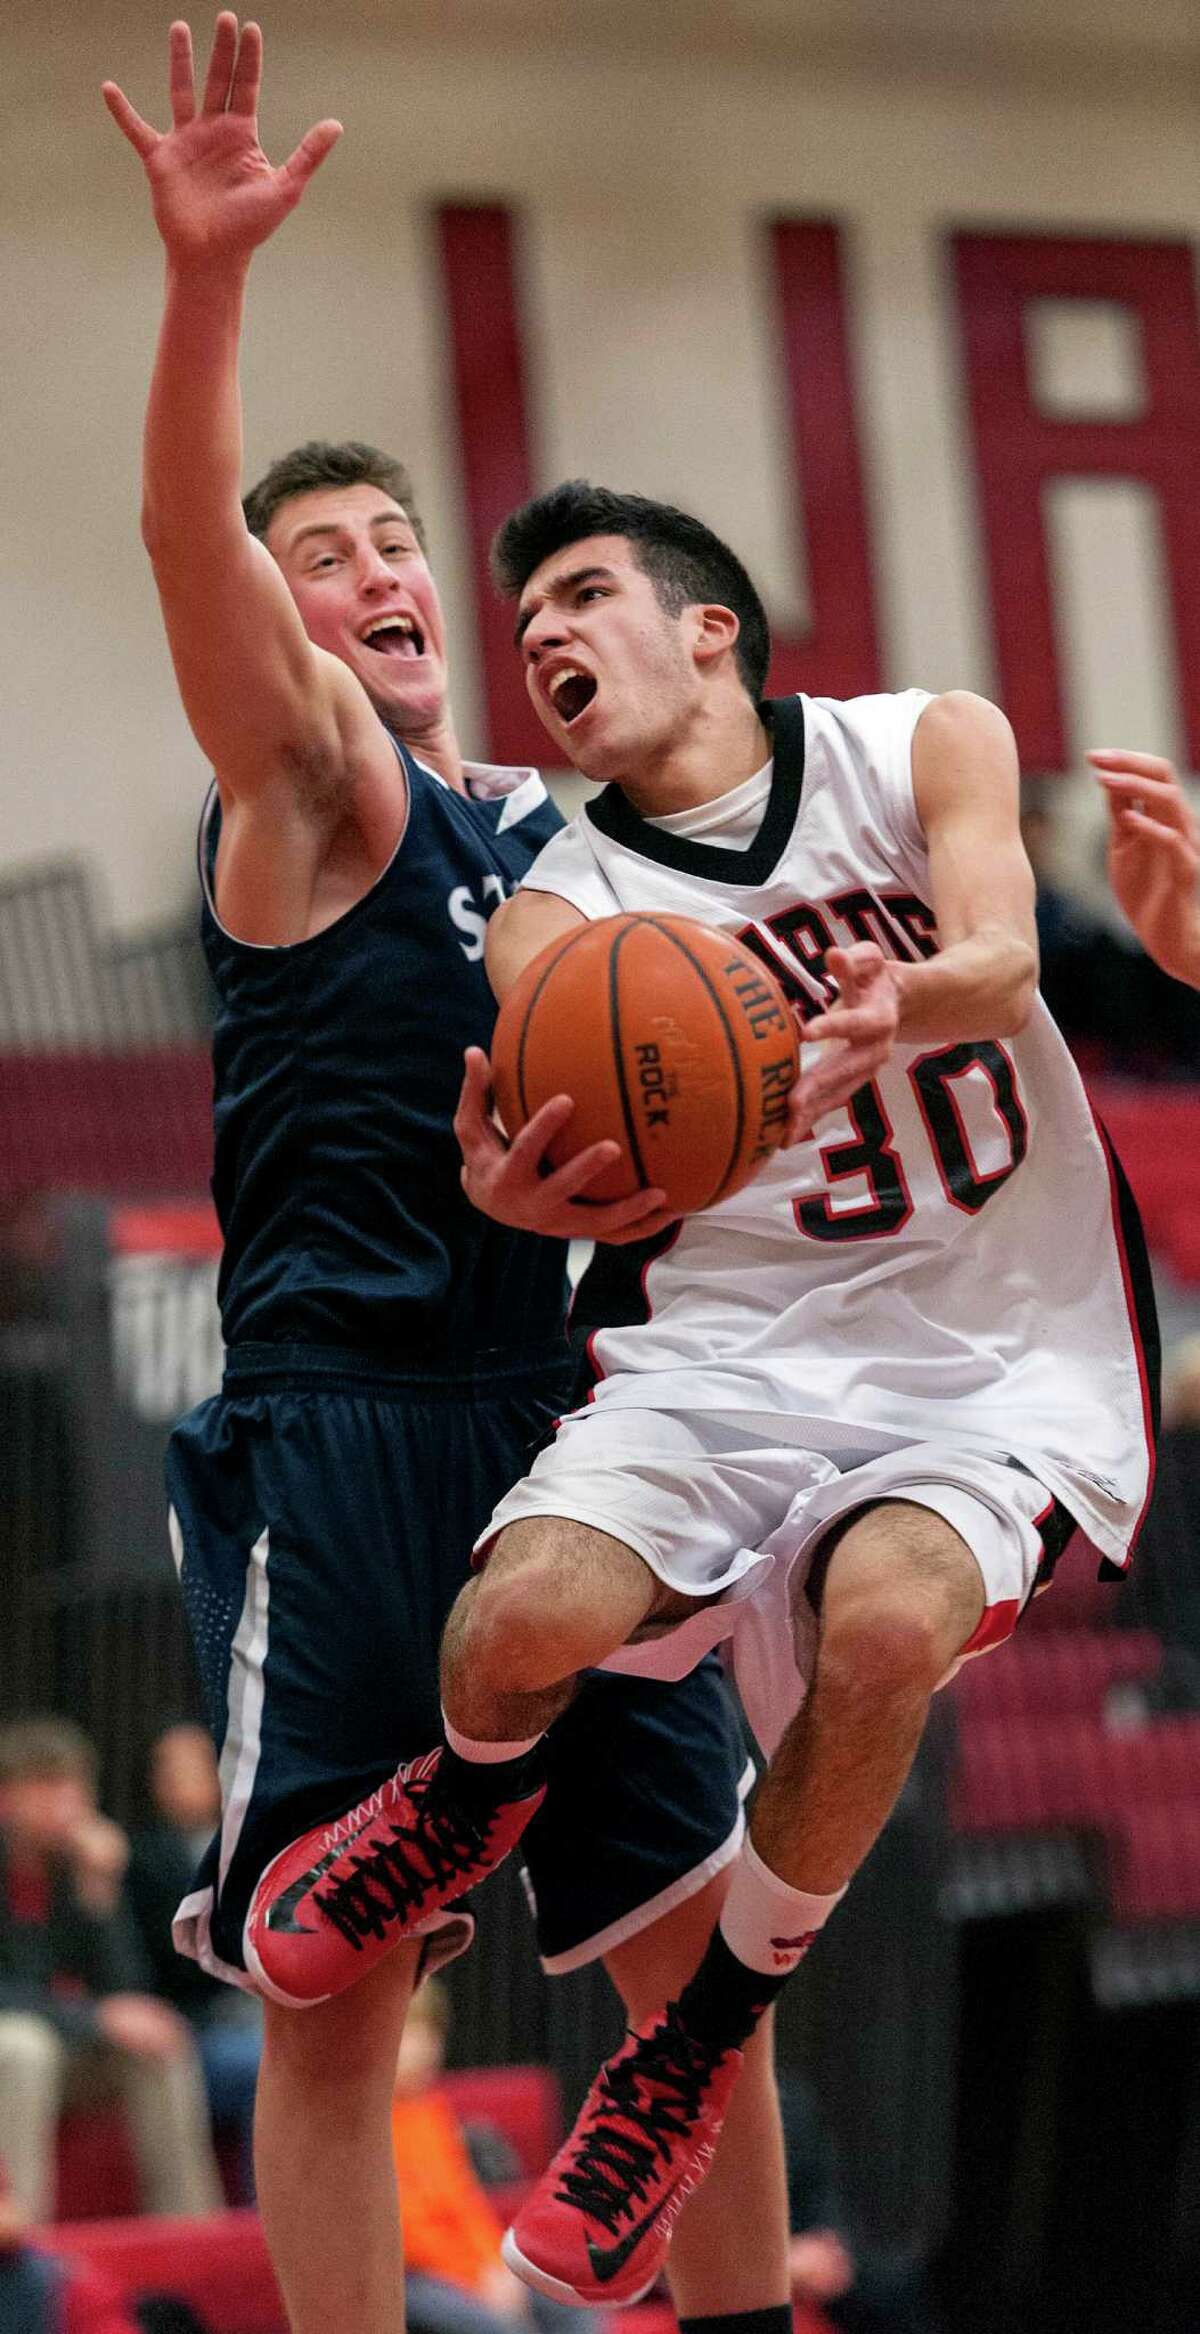 Fairfield Warde high school's Nicholas Cotto goes up for a shot as Staples high school's Todd Goldstein tries to block his shot in a boys basketball game played at Fairfield Warde high school, Fairfield, CT on Friday February 1st, 2013.